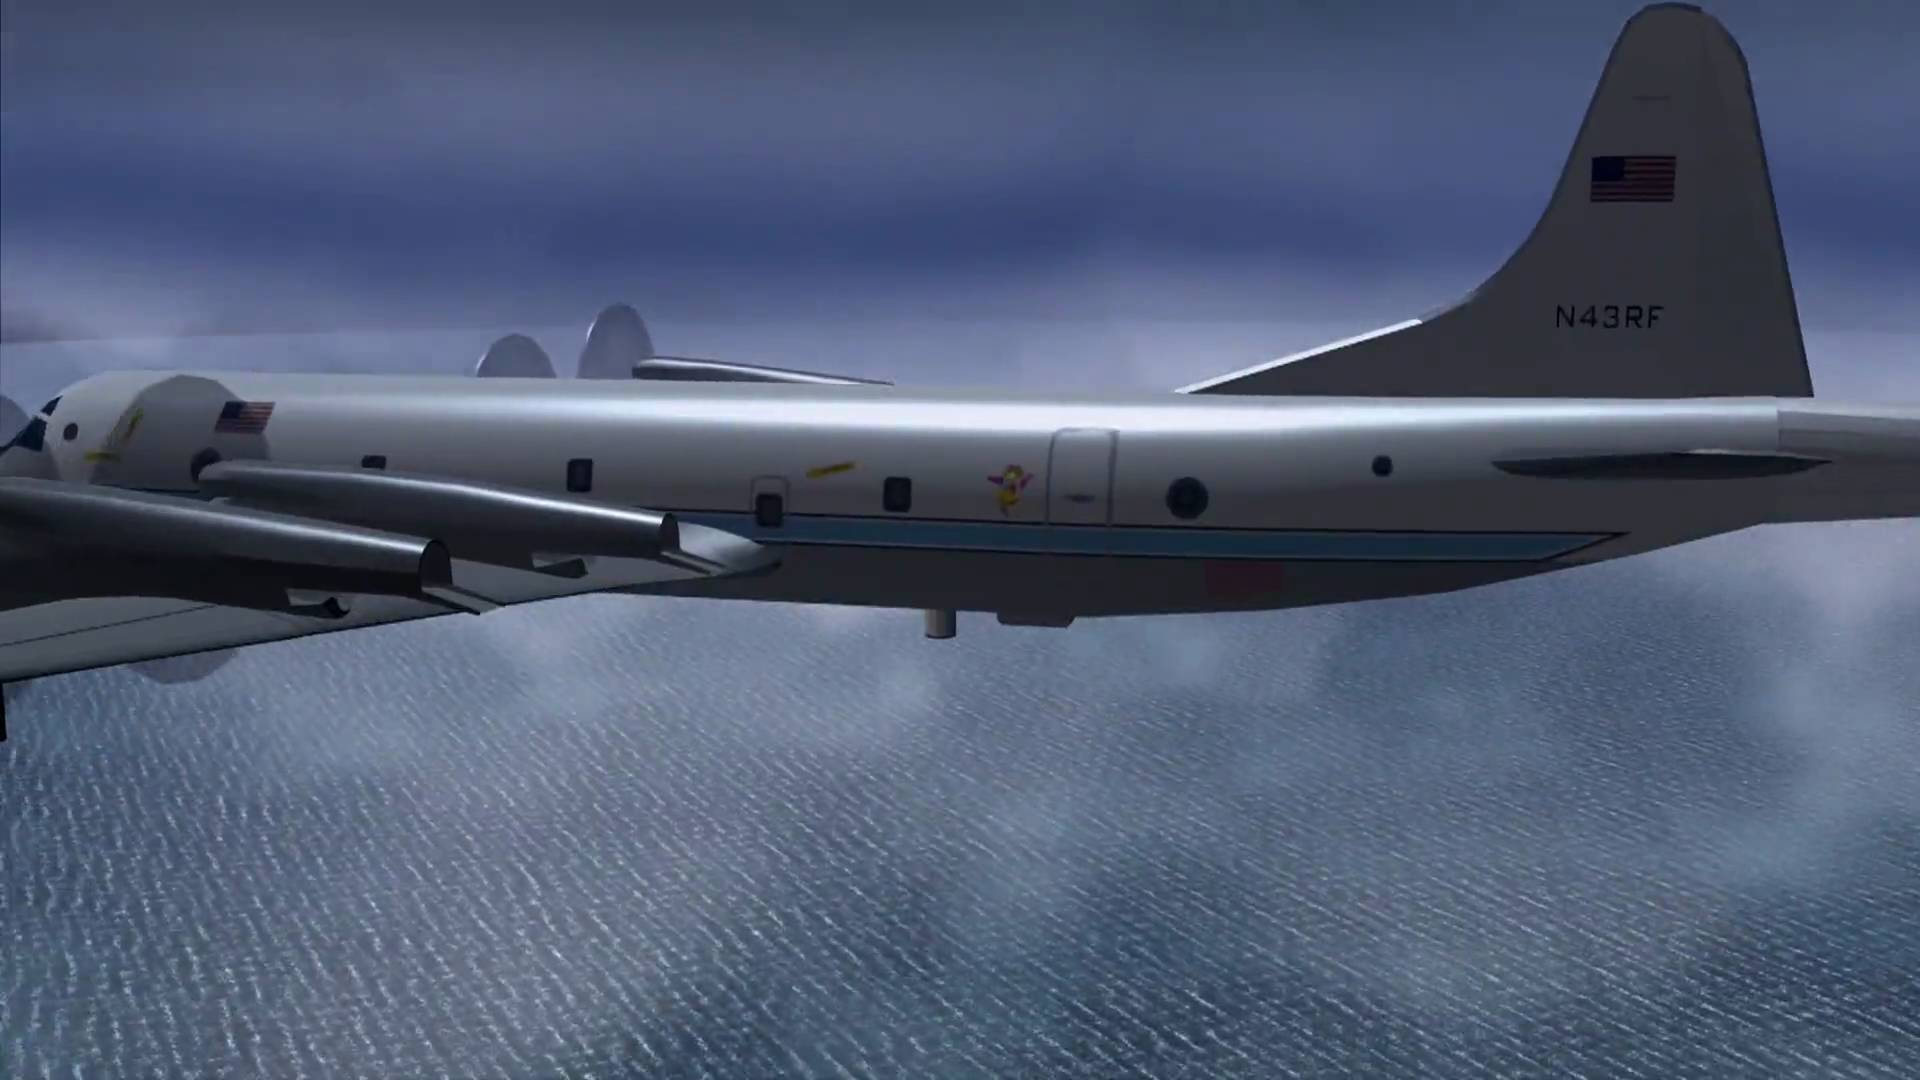 Lockheed Wp-3d Orion  Backgrounds, Compatible - PC, Mobile, Gadgets| 1920x1080 px